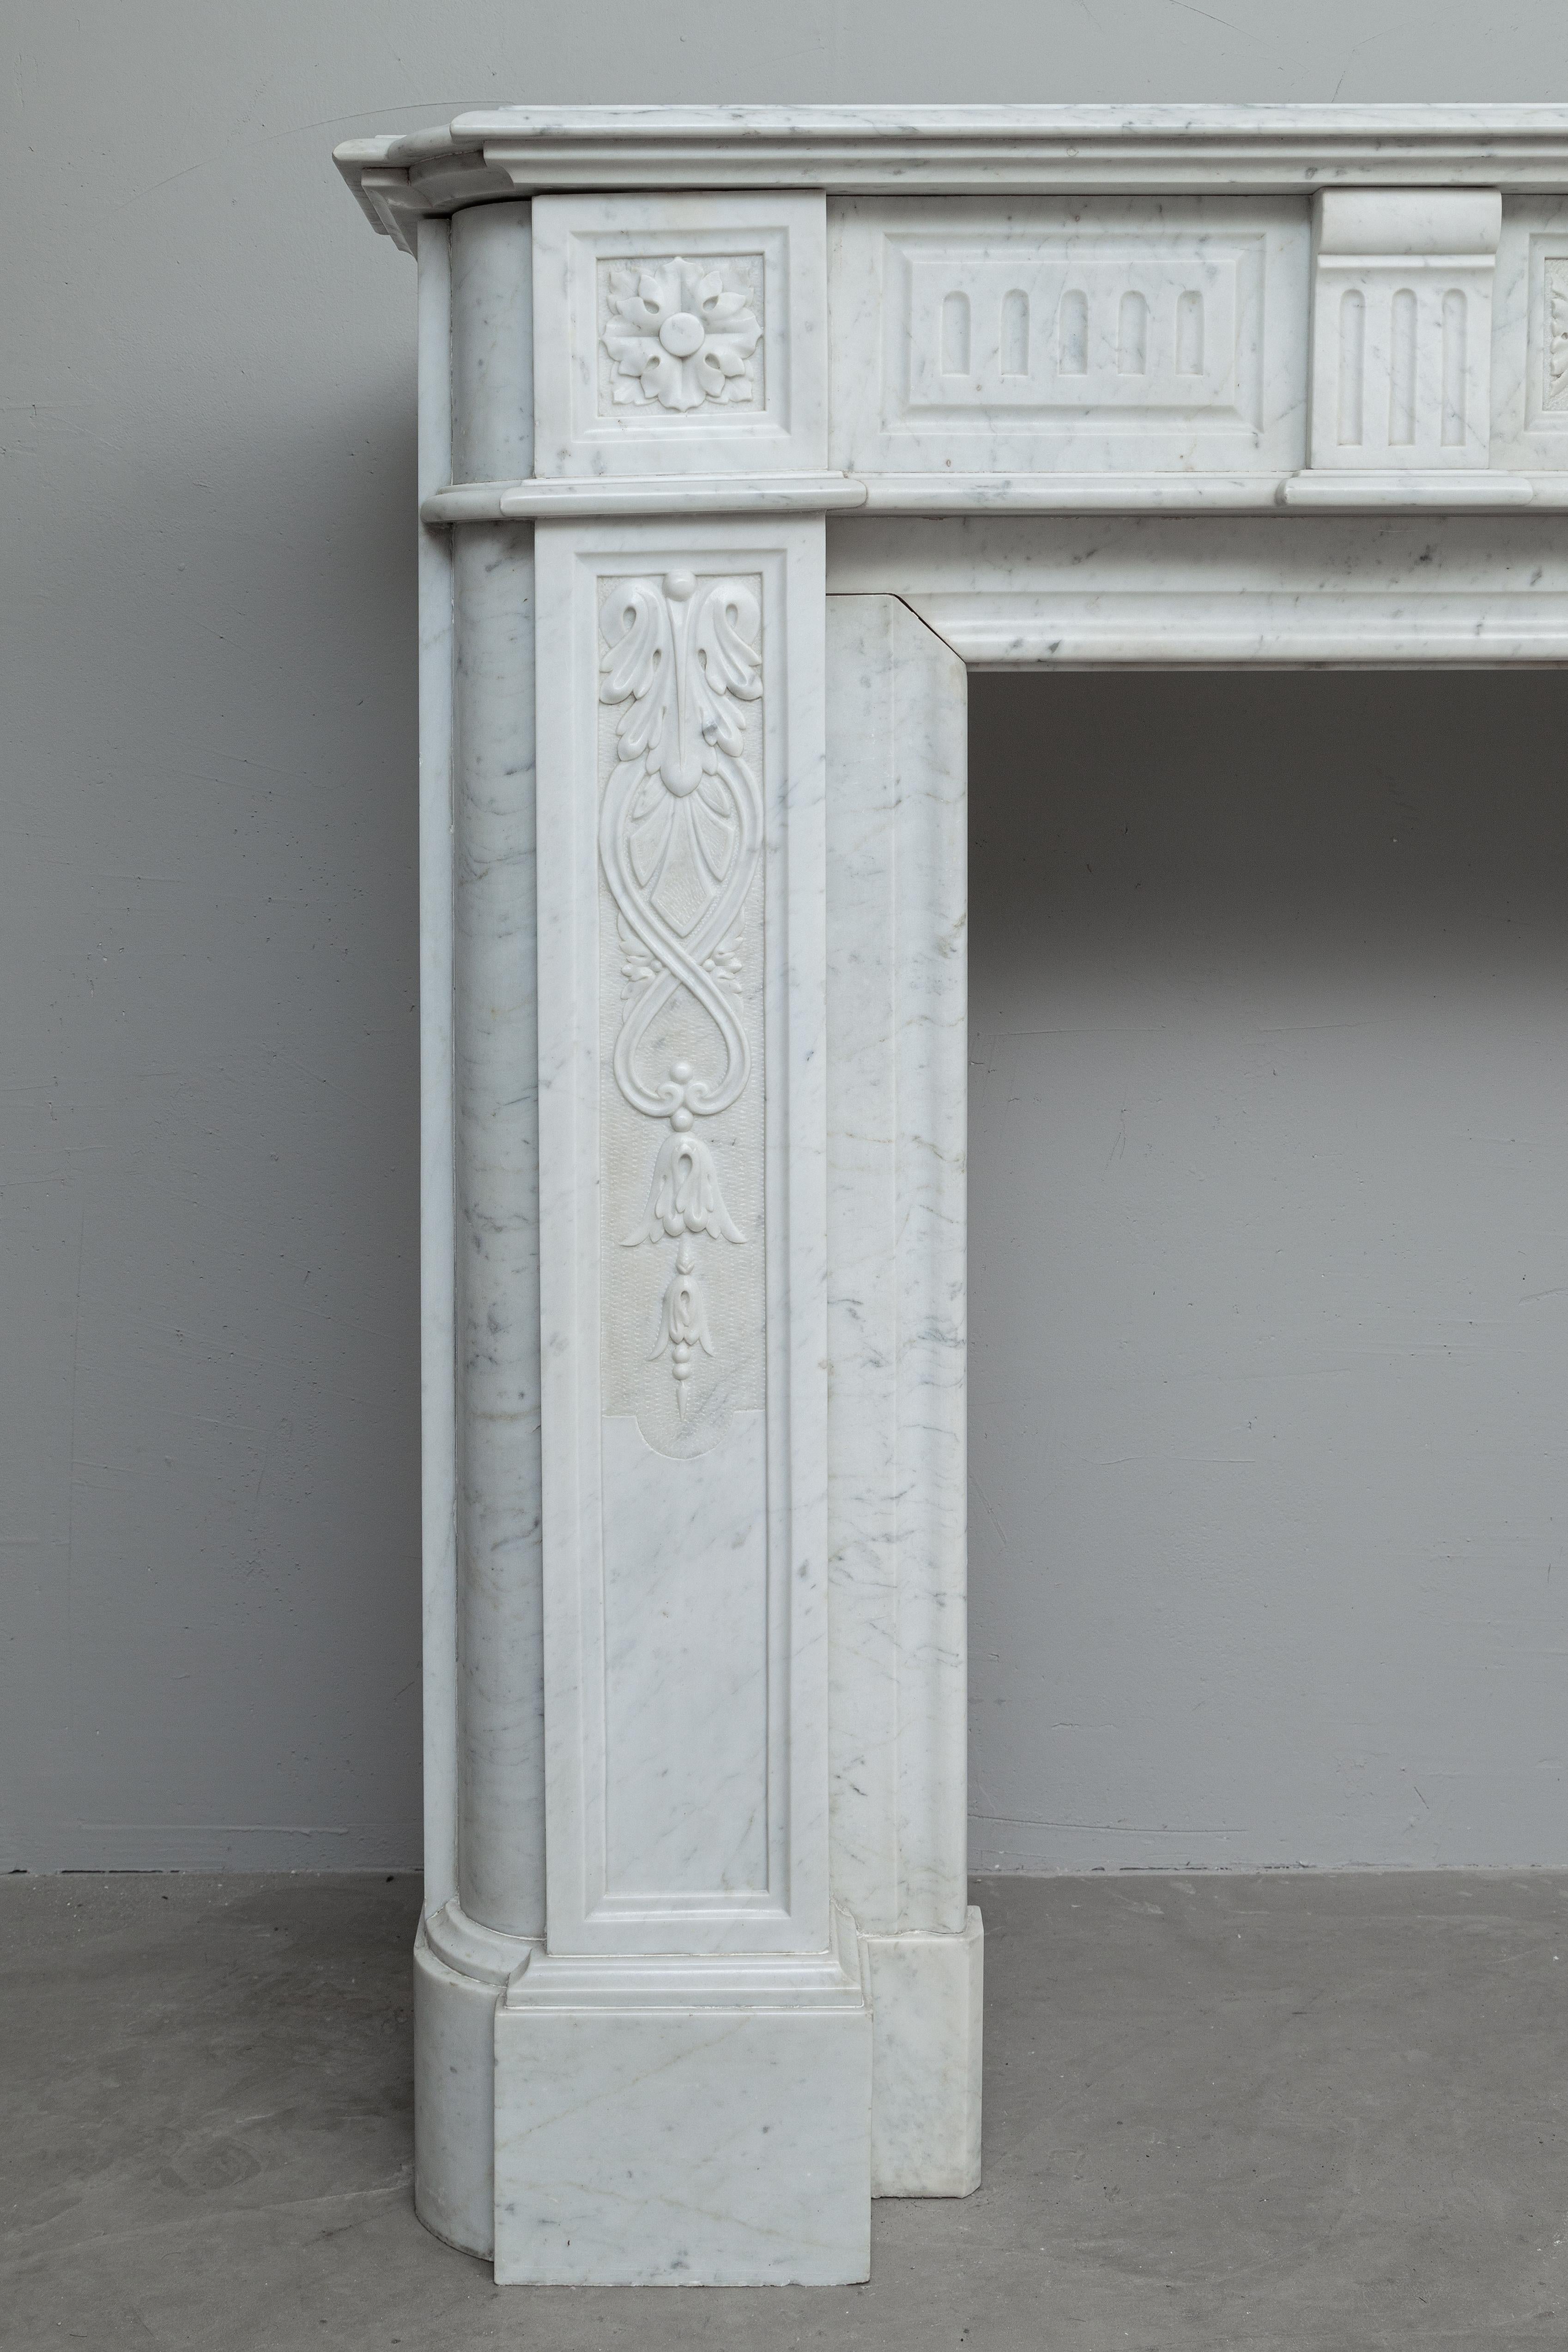 This fireplace, executed in the beautiful clear white Carrara marble, exudes luxury. The round corners that continue from the plinth to the top give this fireplace its elegant appearance. The subtly elaborated legs with flower and leaf motif, the 2